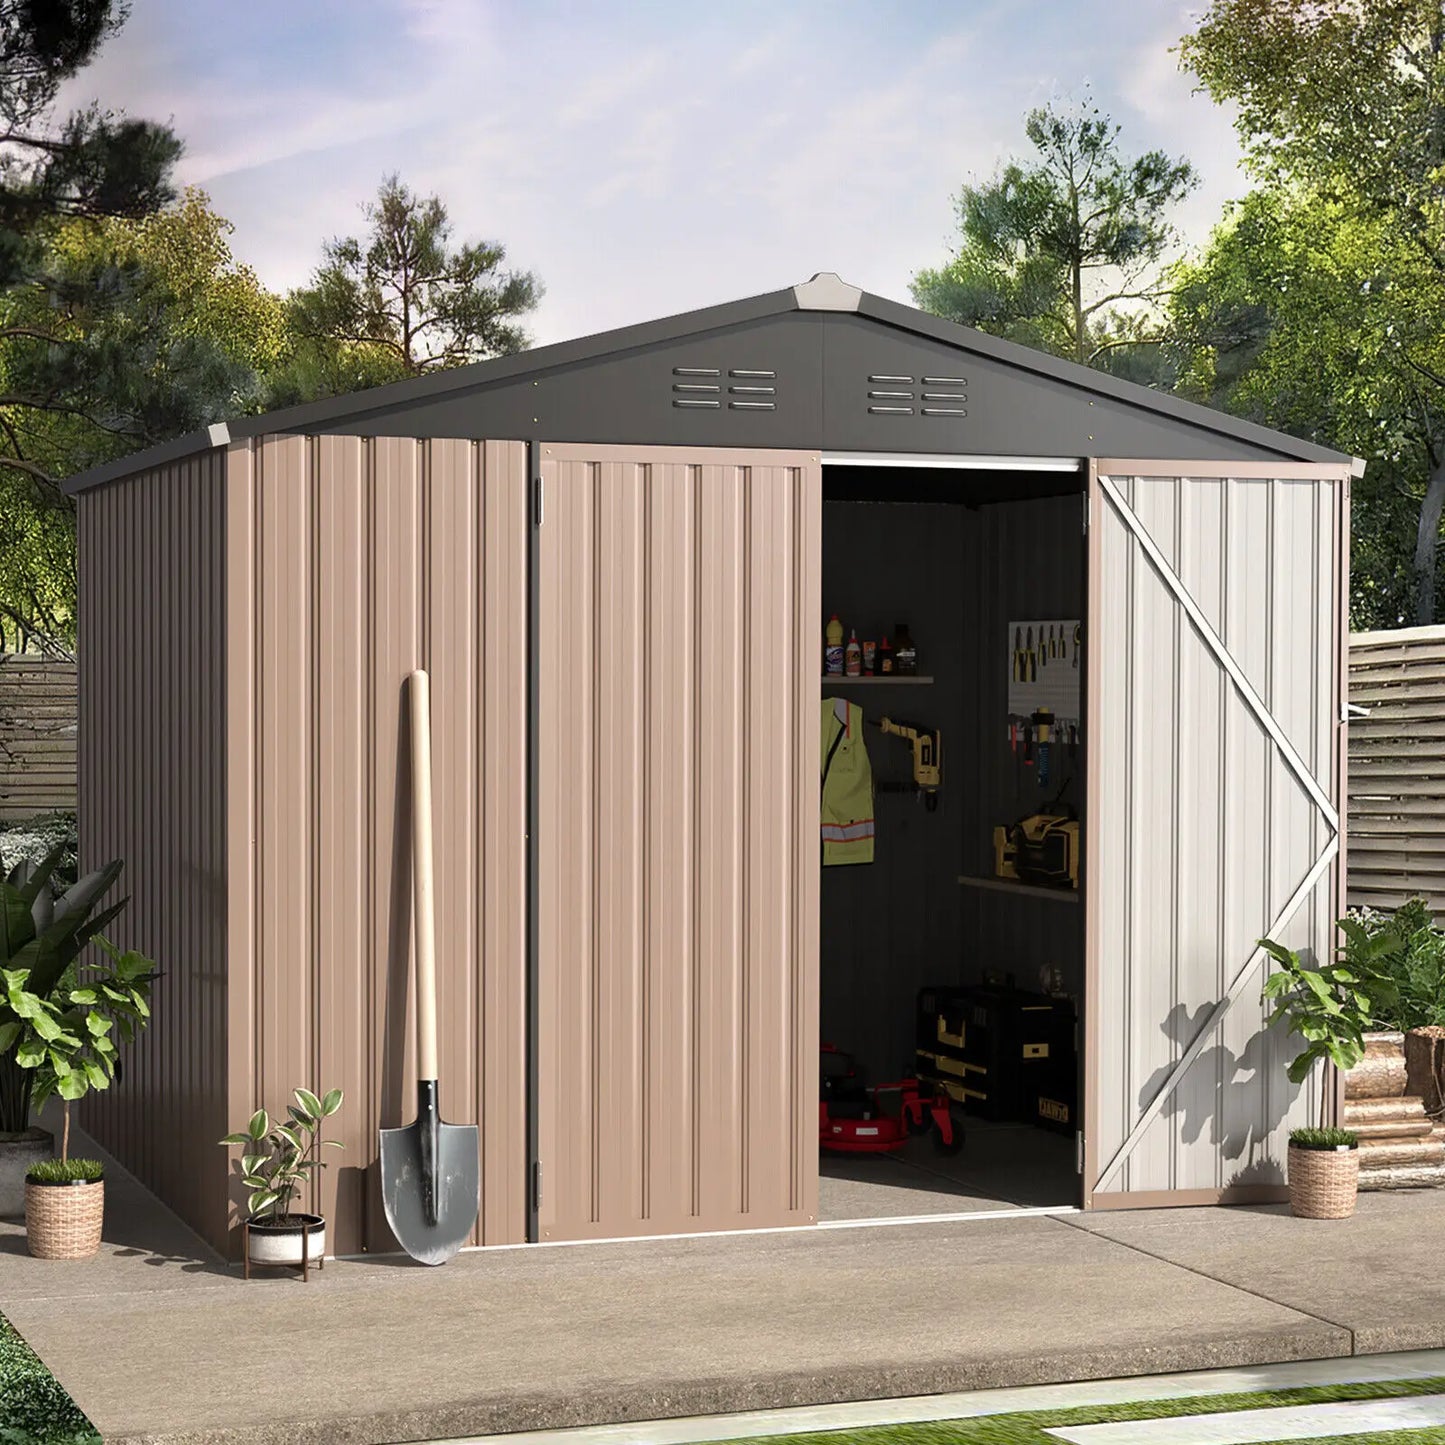 4'x6' Outdoor Metal Storage Shed for Garden Tools